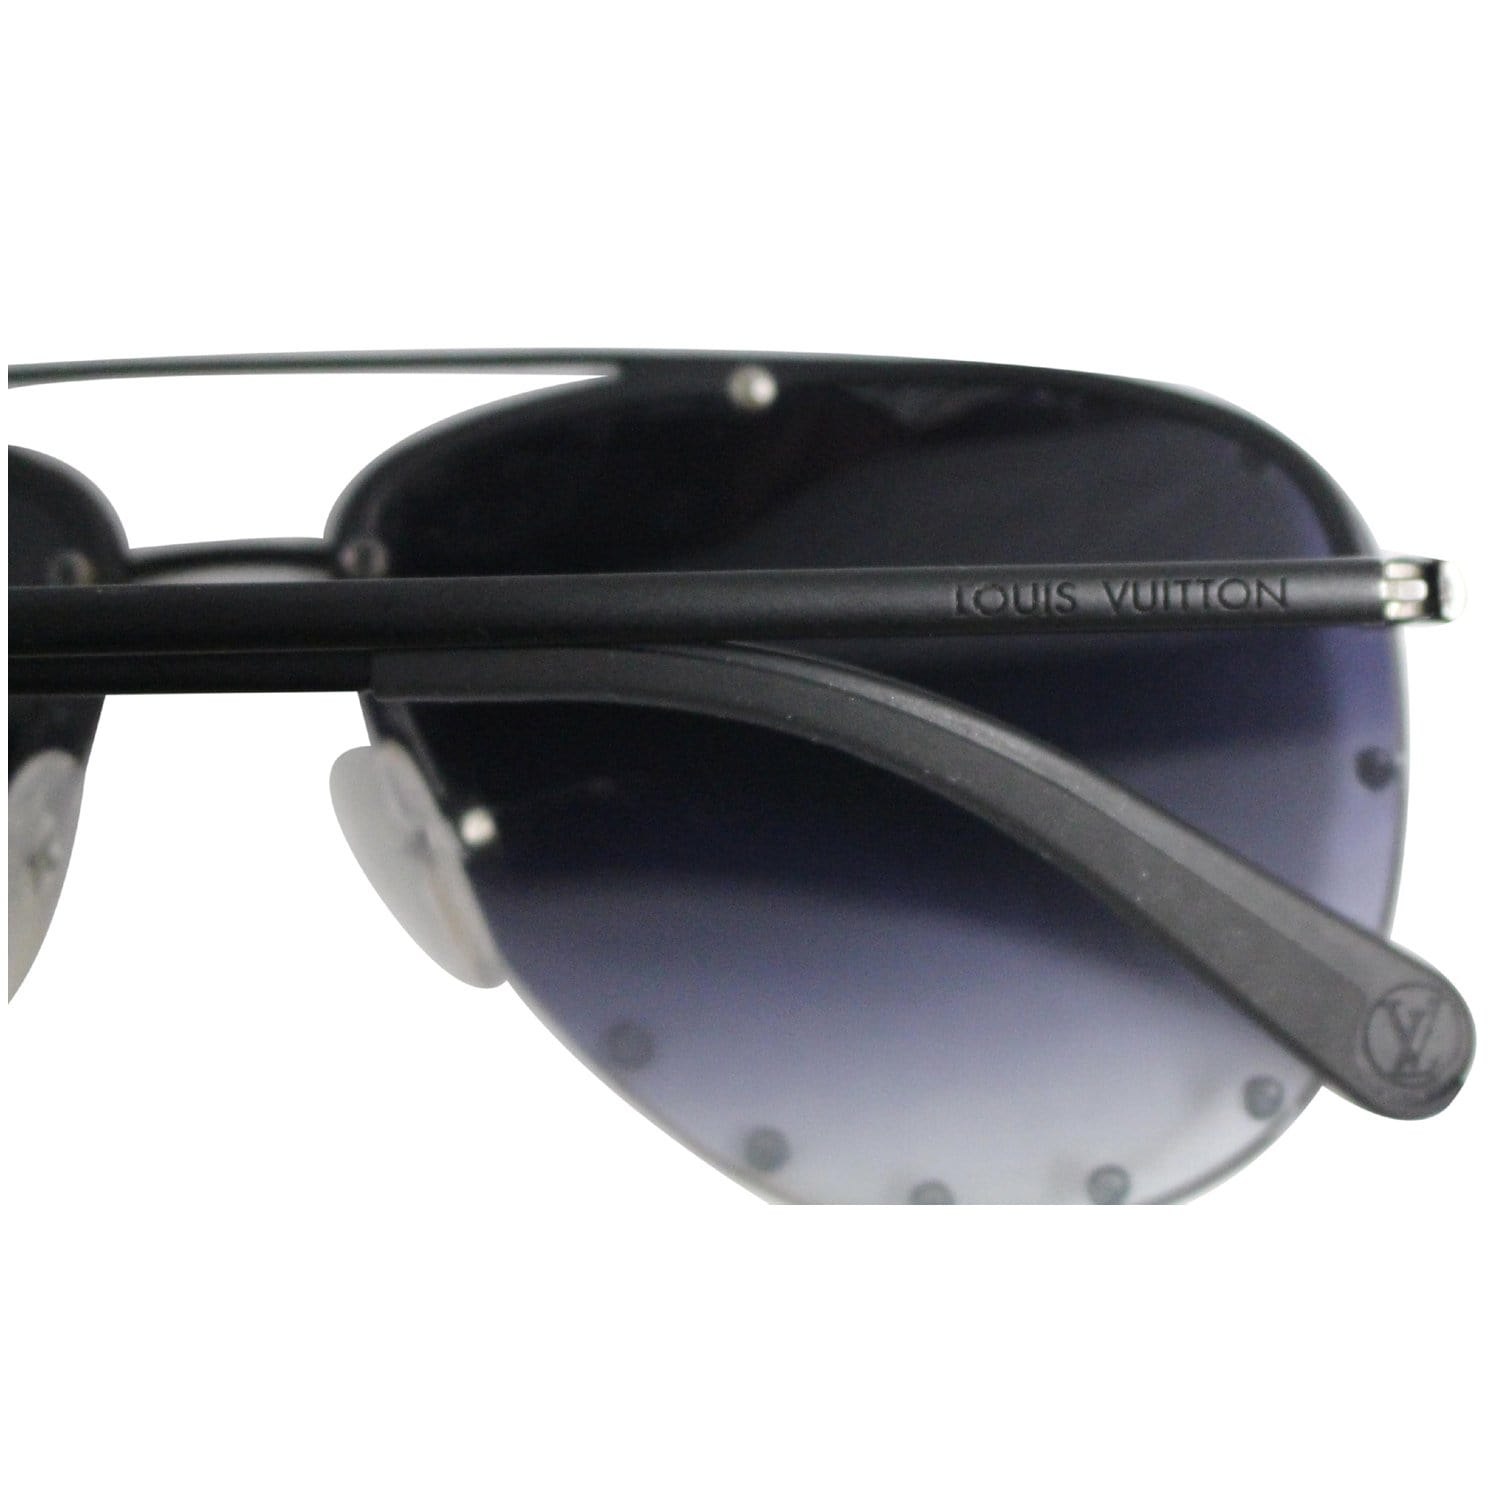 Louis Vuitton Sunglasses  Buy or Sell your Designer Sunglasses